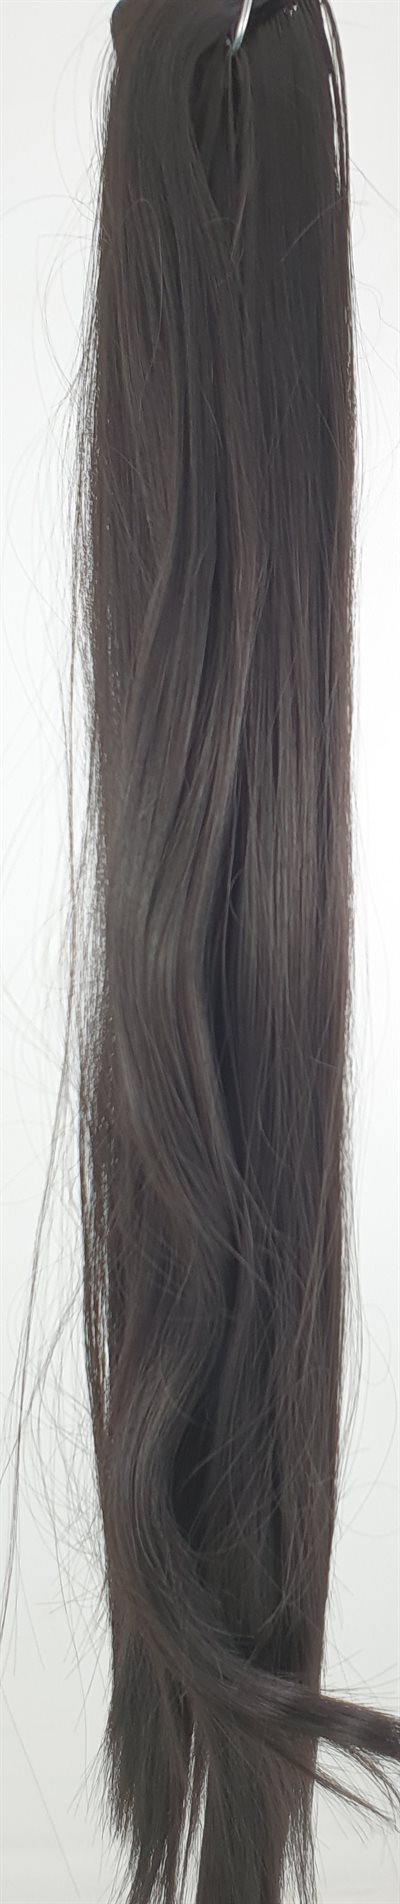 Hair Syntietic Ponytail Straight 30" - 75 Cm Long 130 g. Colour 2 Dark brown.